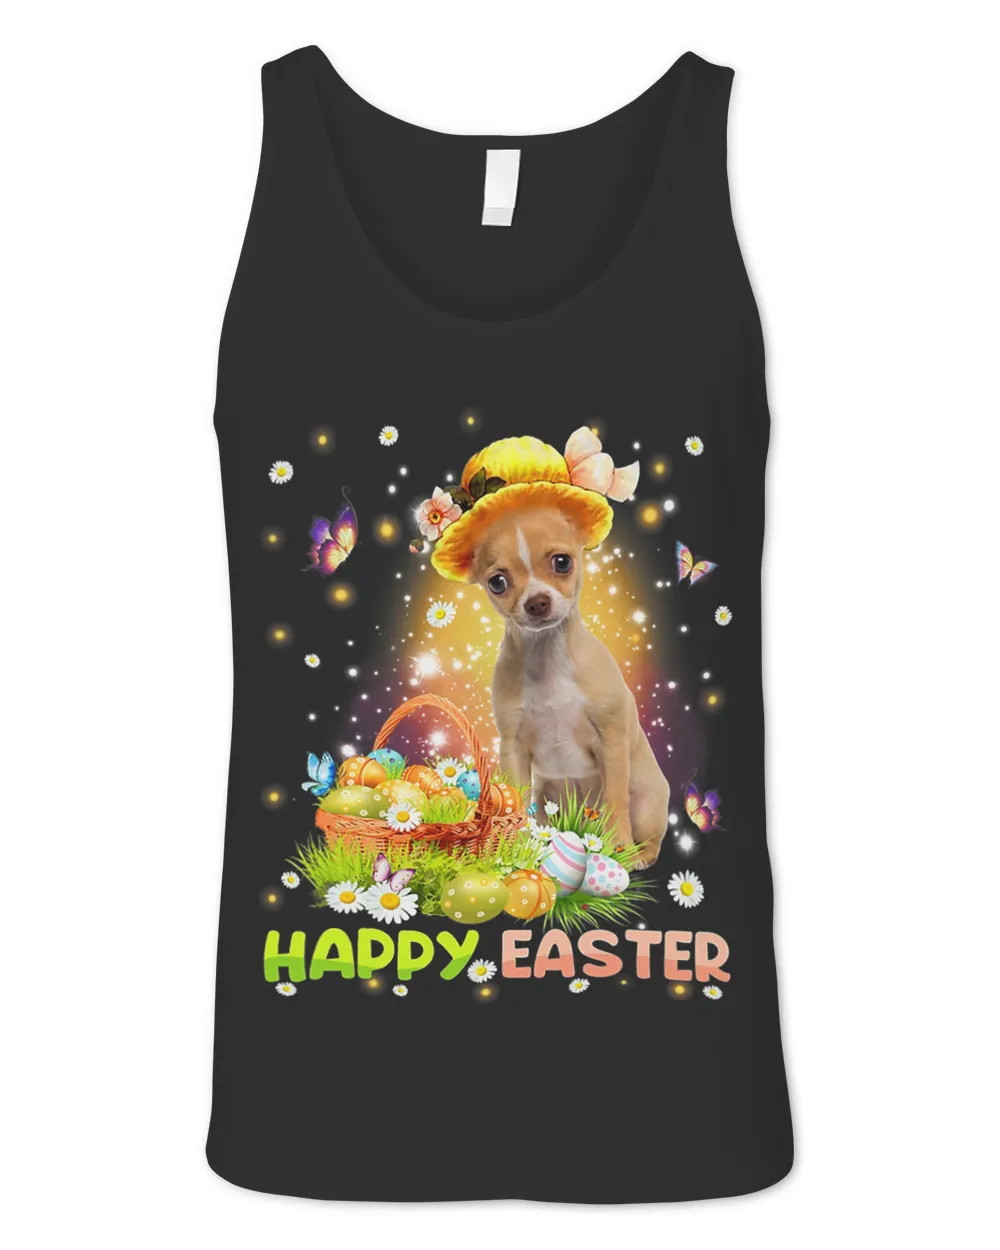 Happy Easter Cute Bunny Dog Chihuahua Eggs Basket Funny Dog